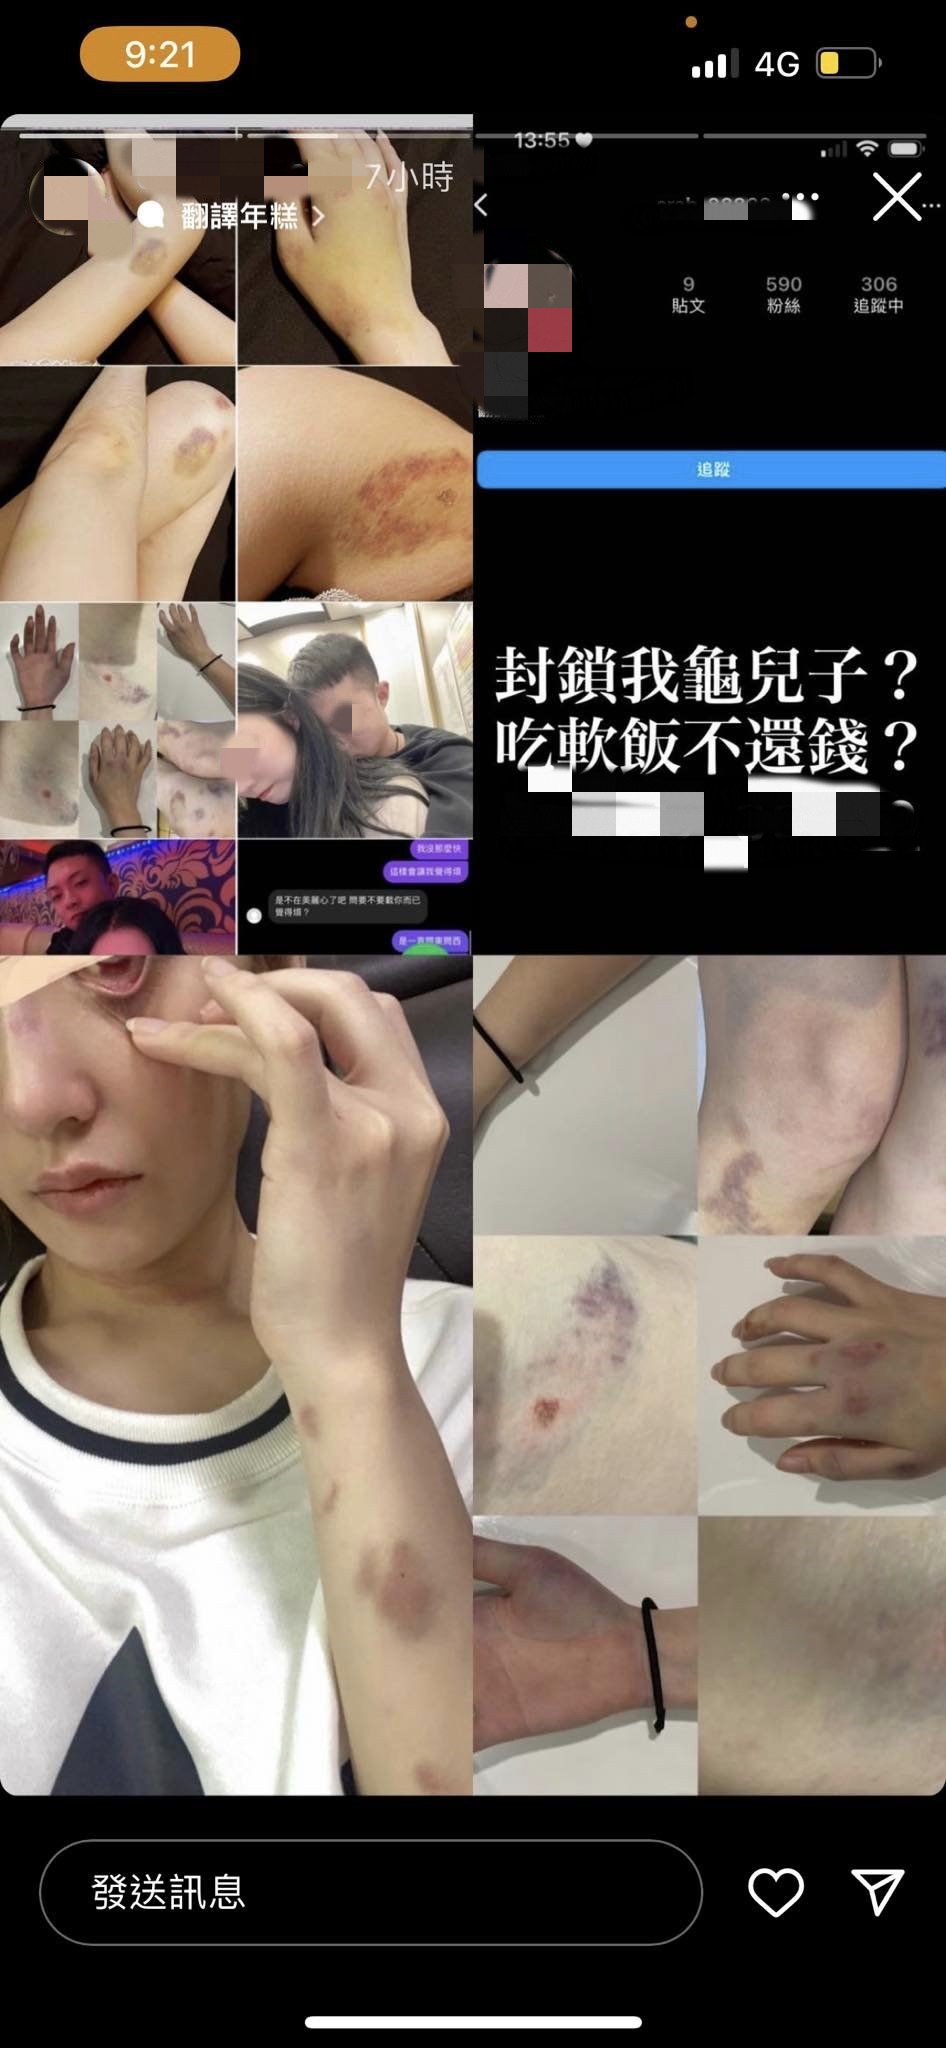 cai-ying-wen-domestic-violence-ex-bf